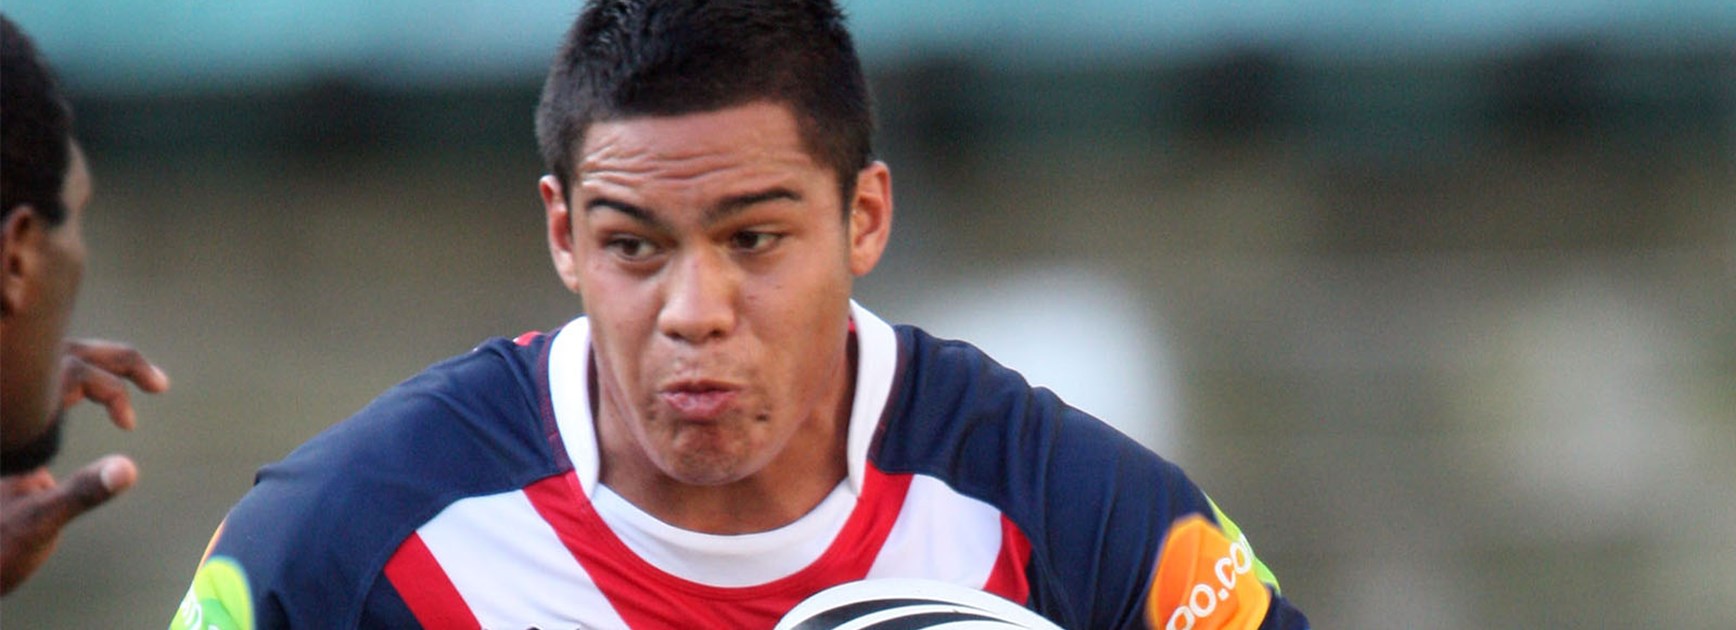 Anthony Cherrington playing for the Roosters in 2008.